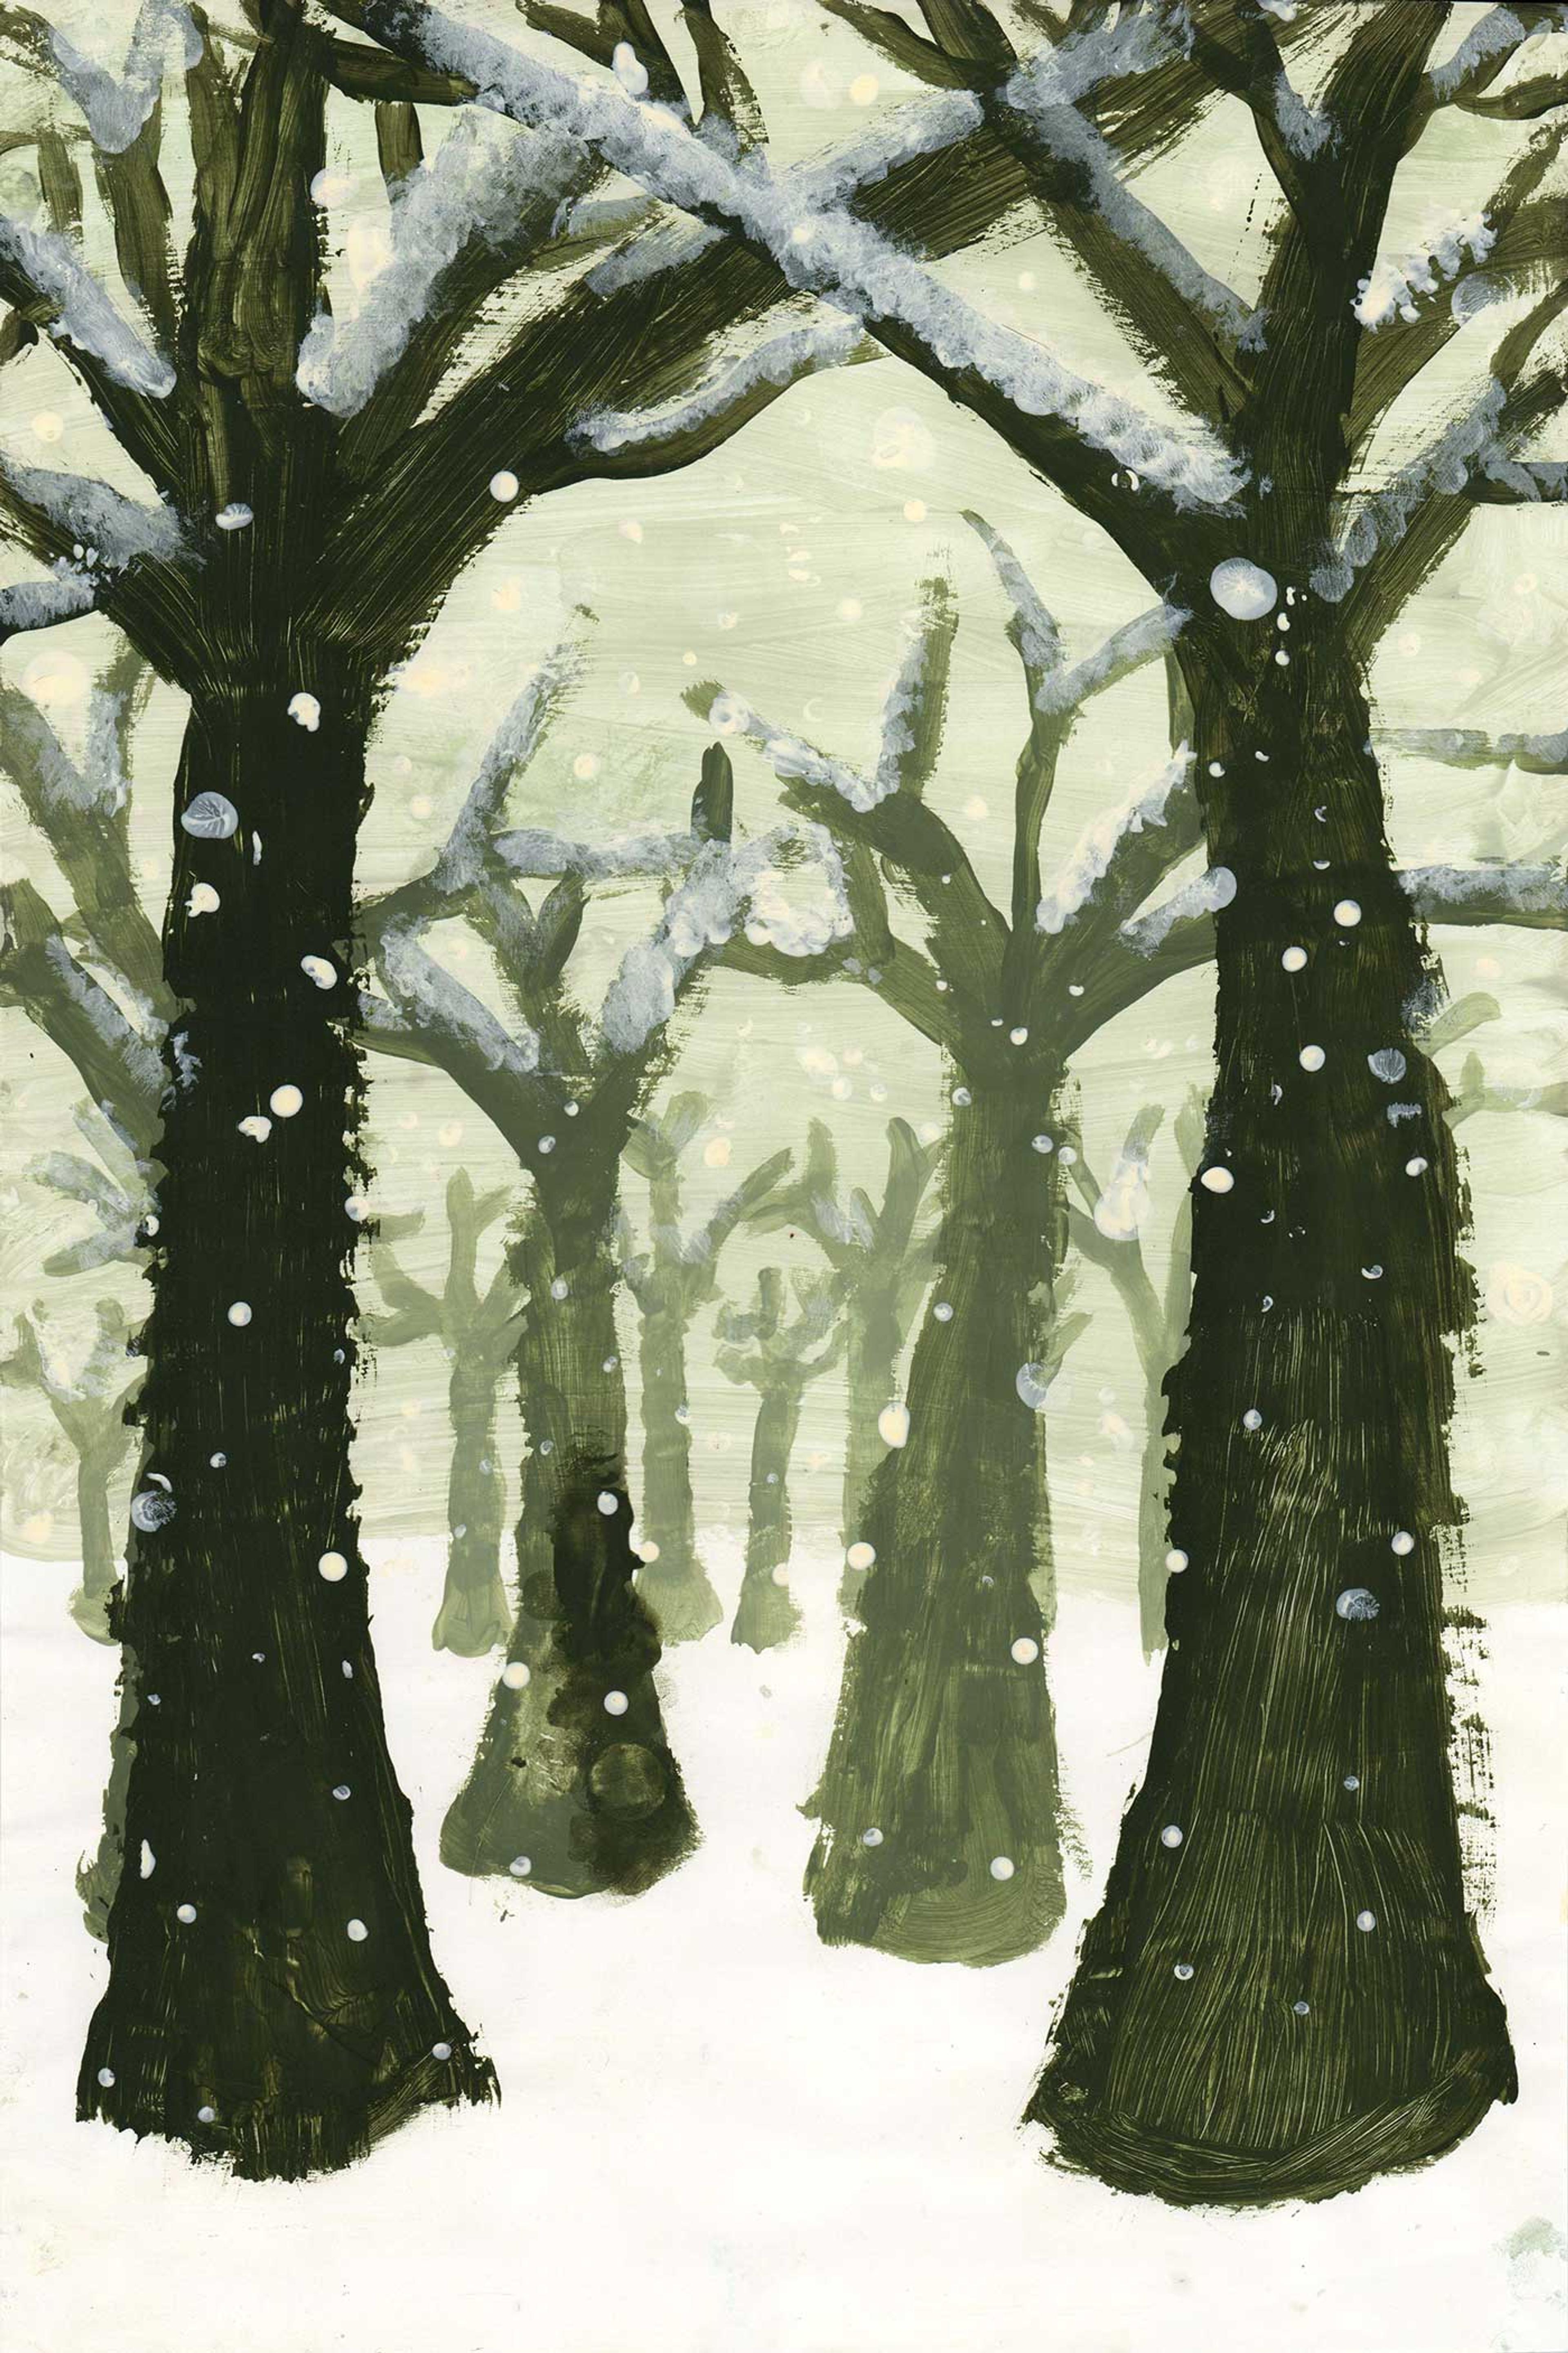 Painting of a forest in winter with bare trees and a gray background.